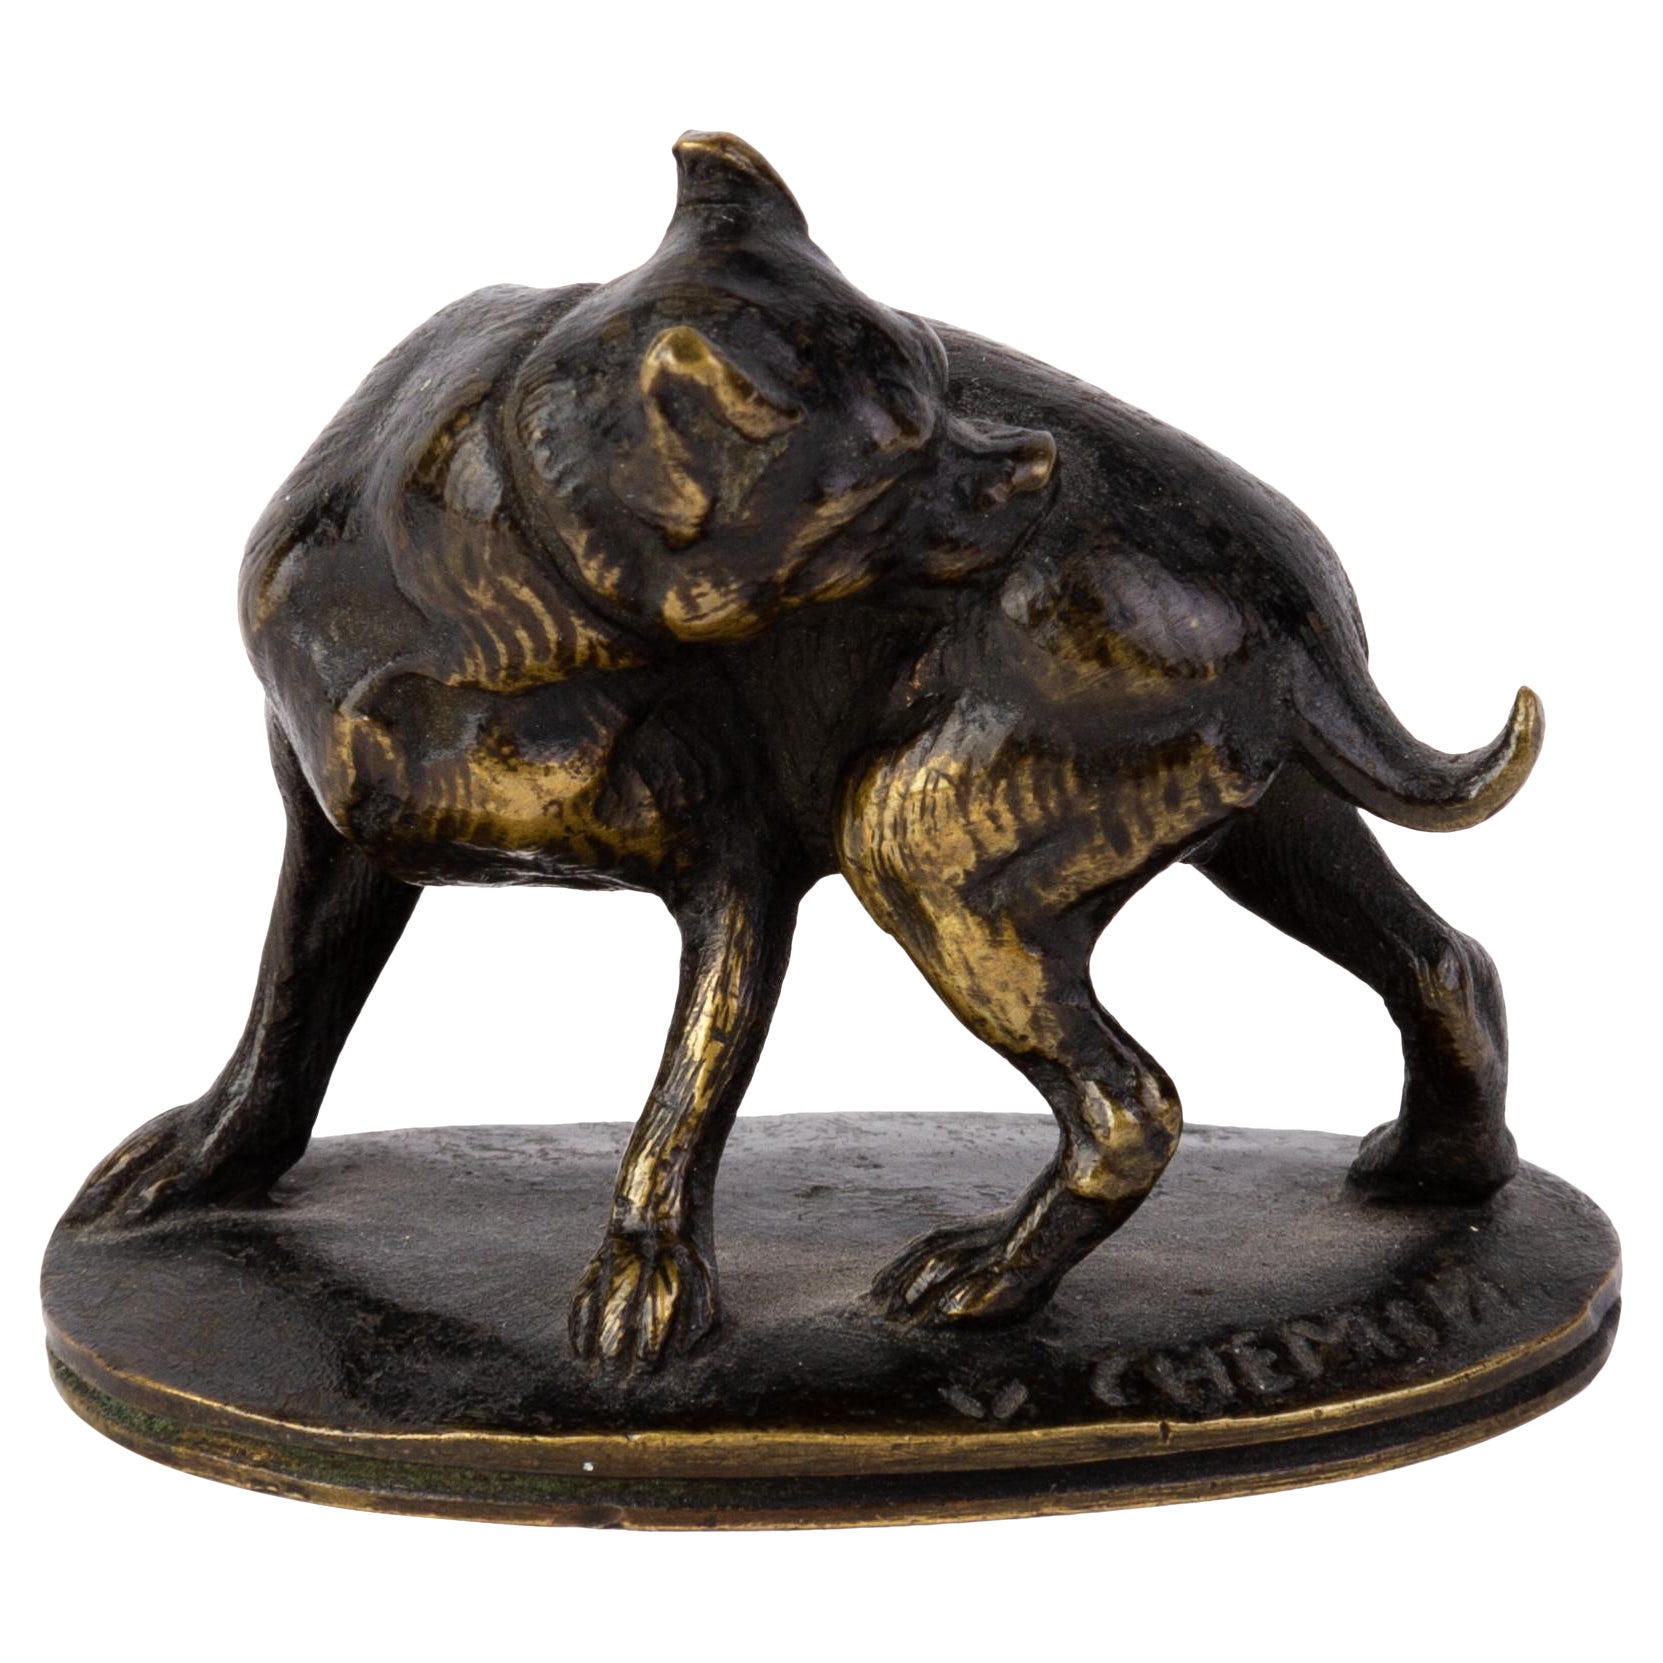 Victor Chemin (1825-1901) Signed French Animalier Bronze Sculpture ca. 1880